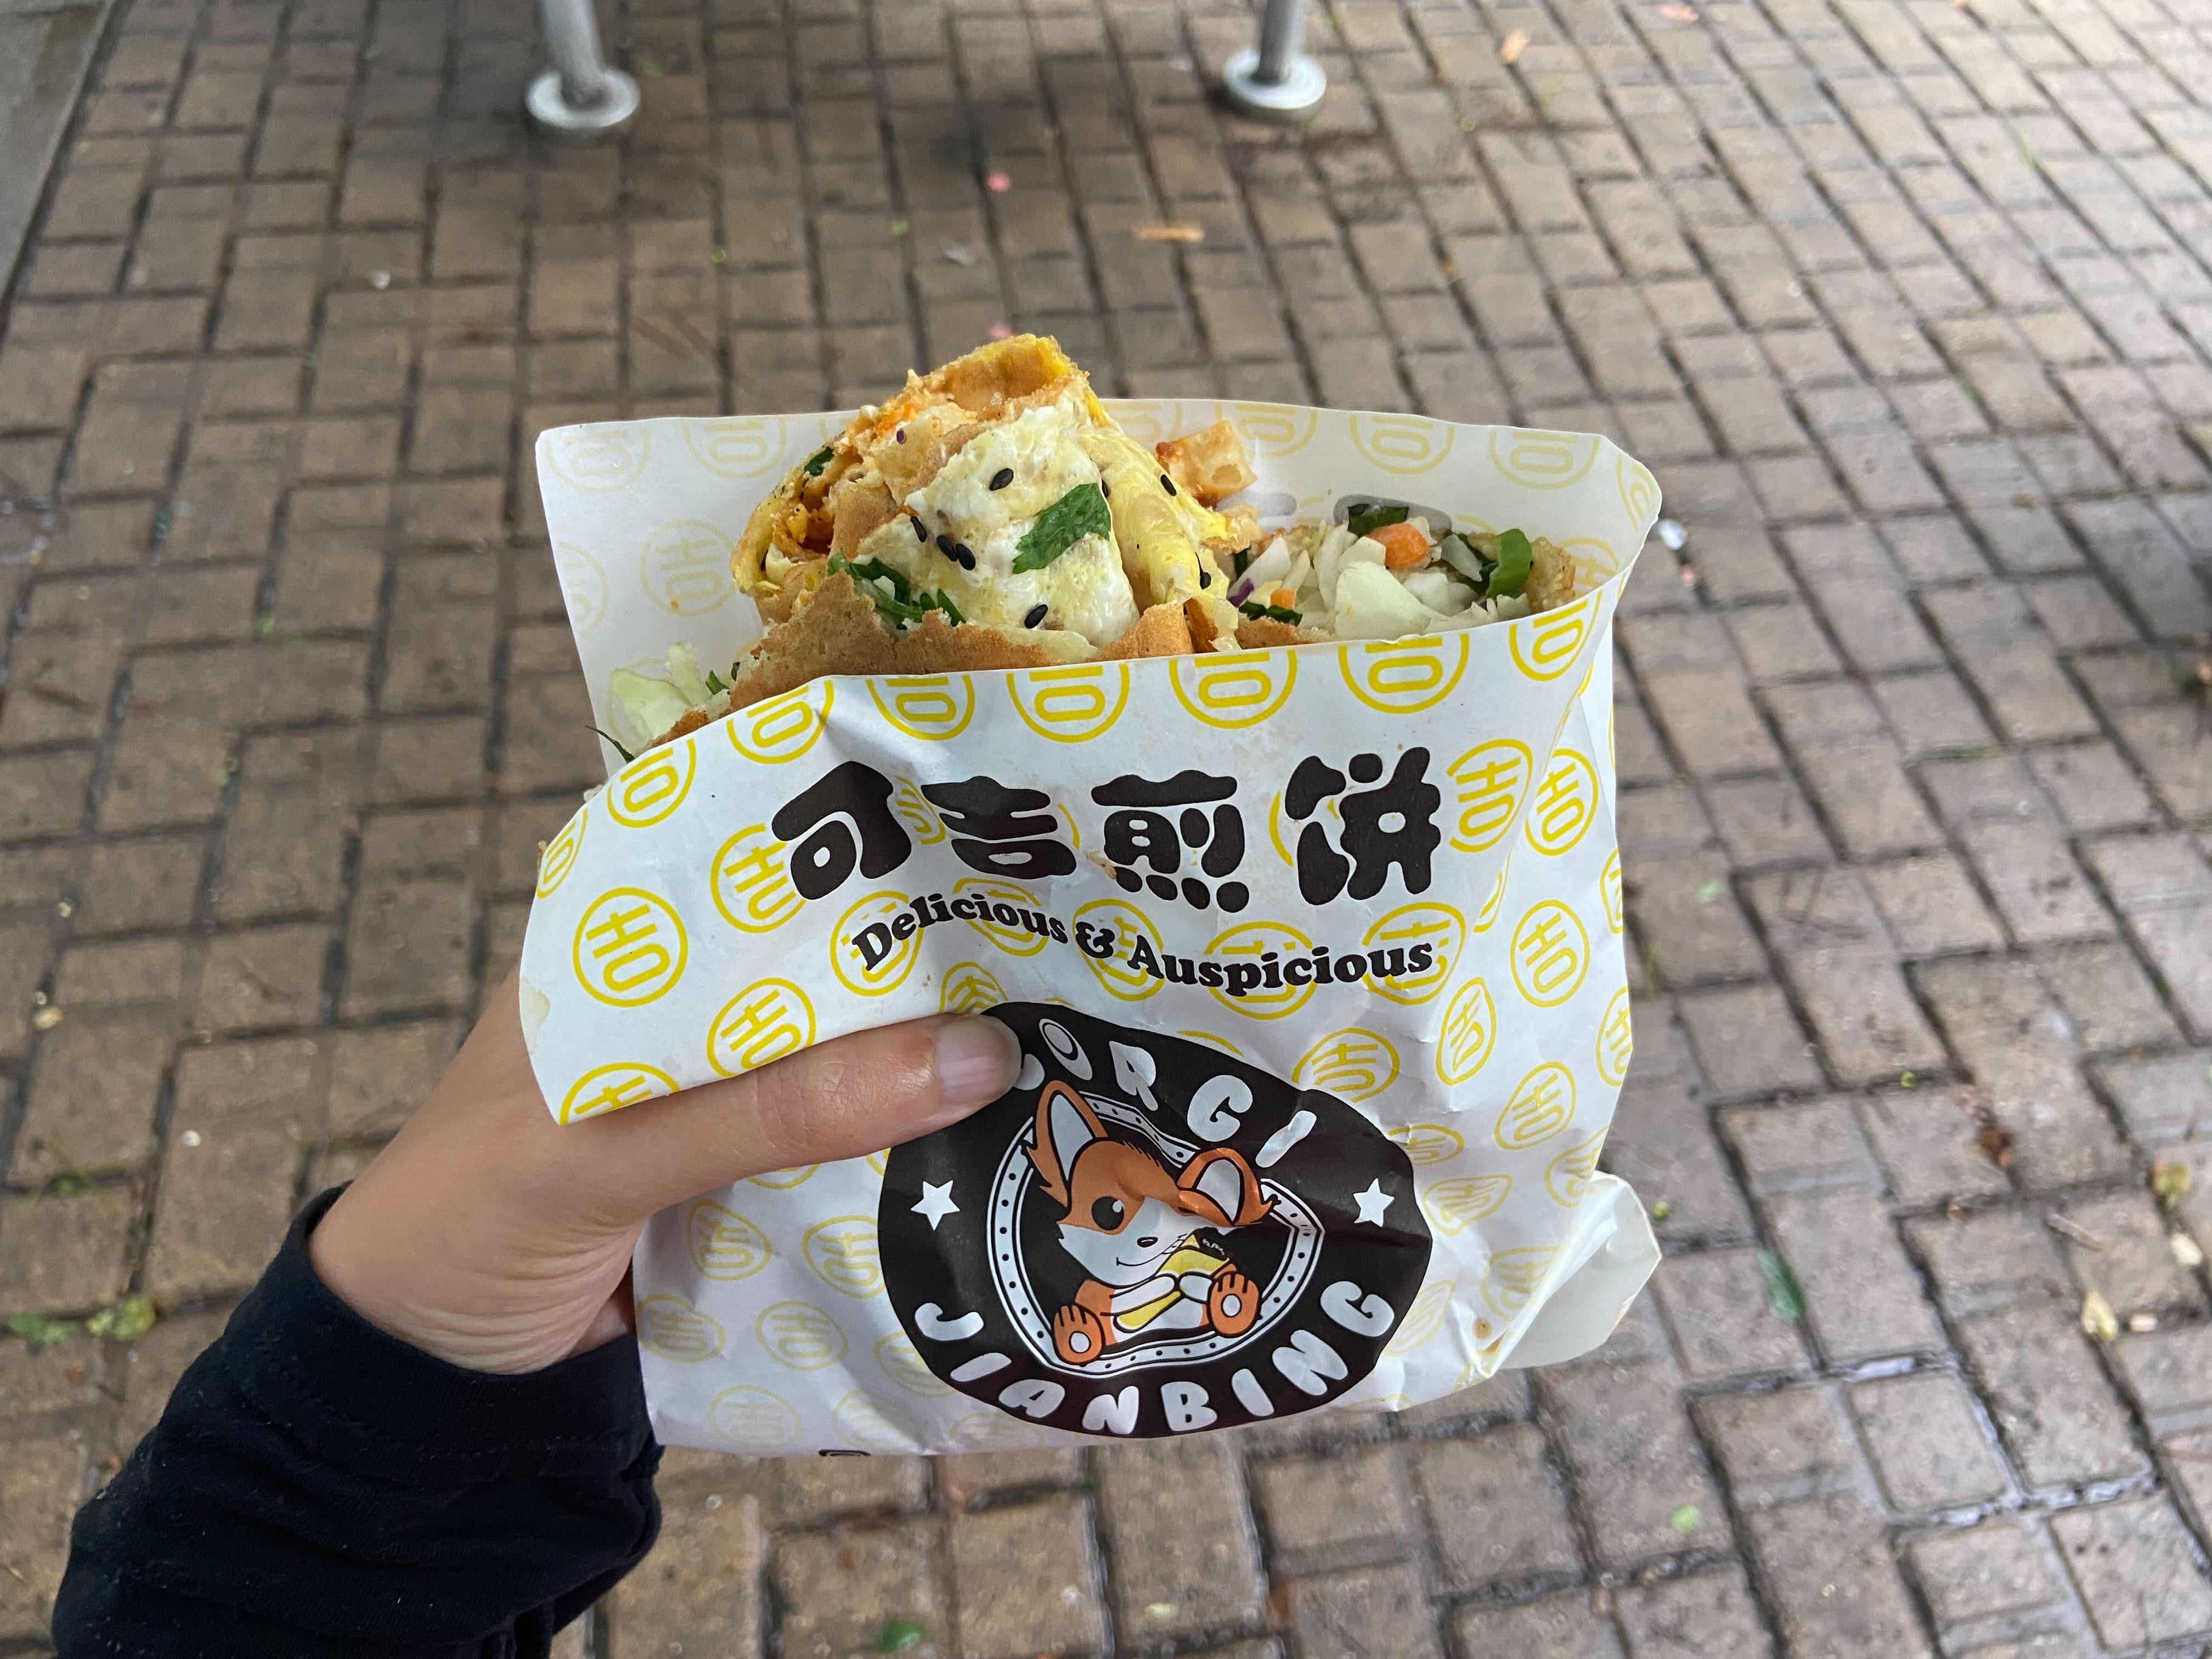 A hand holds up a jianbing in wrapping with a corgi cartoon character.